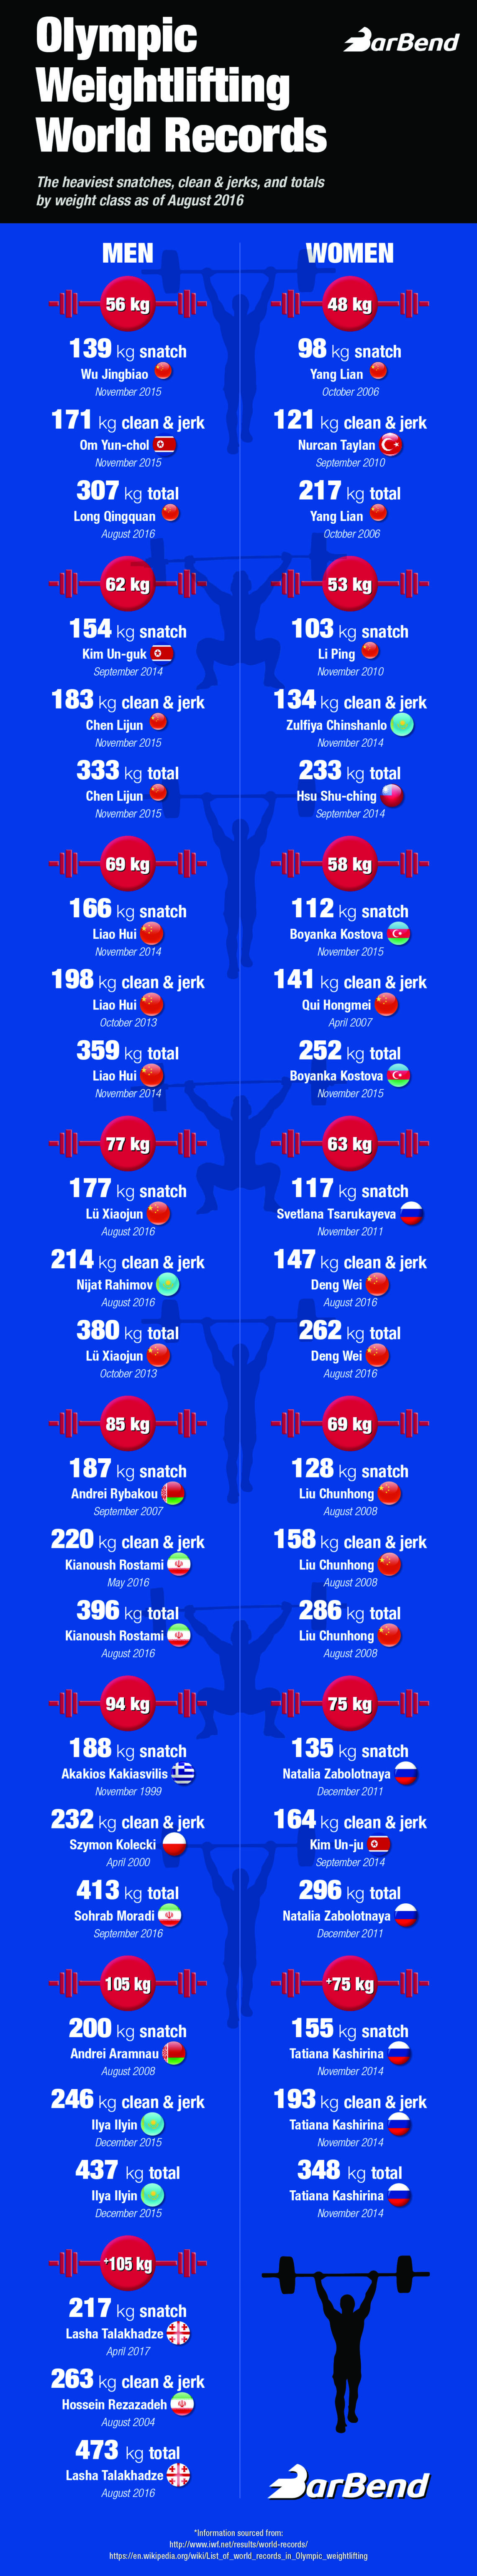 Every Current Olympic Weightlifting World Record (Infographic)